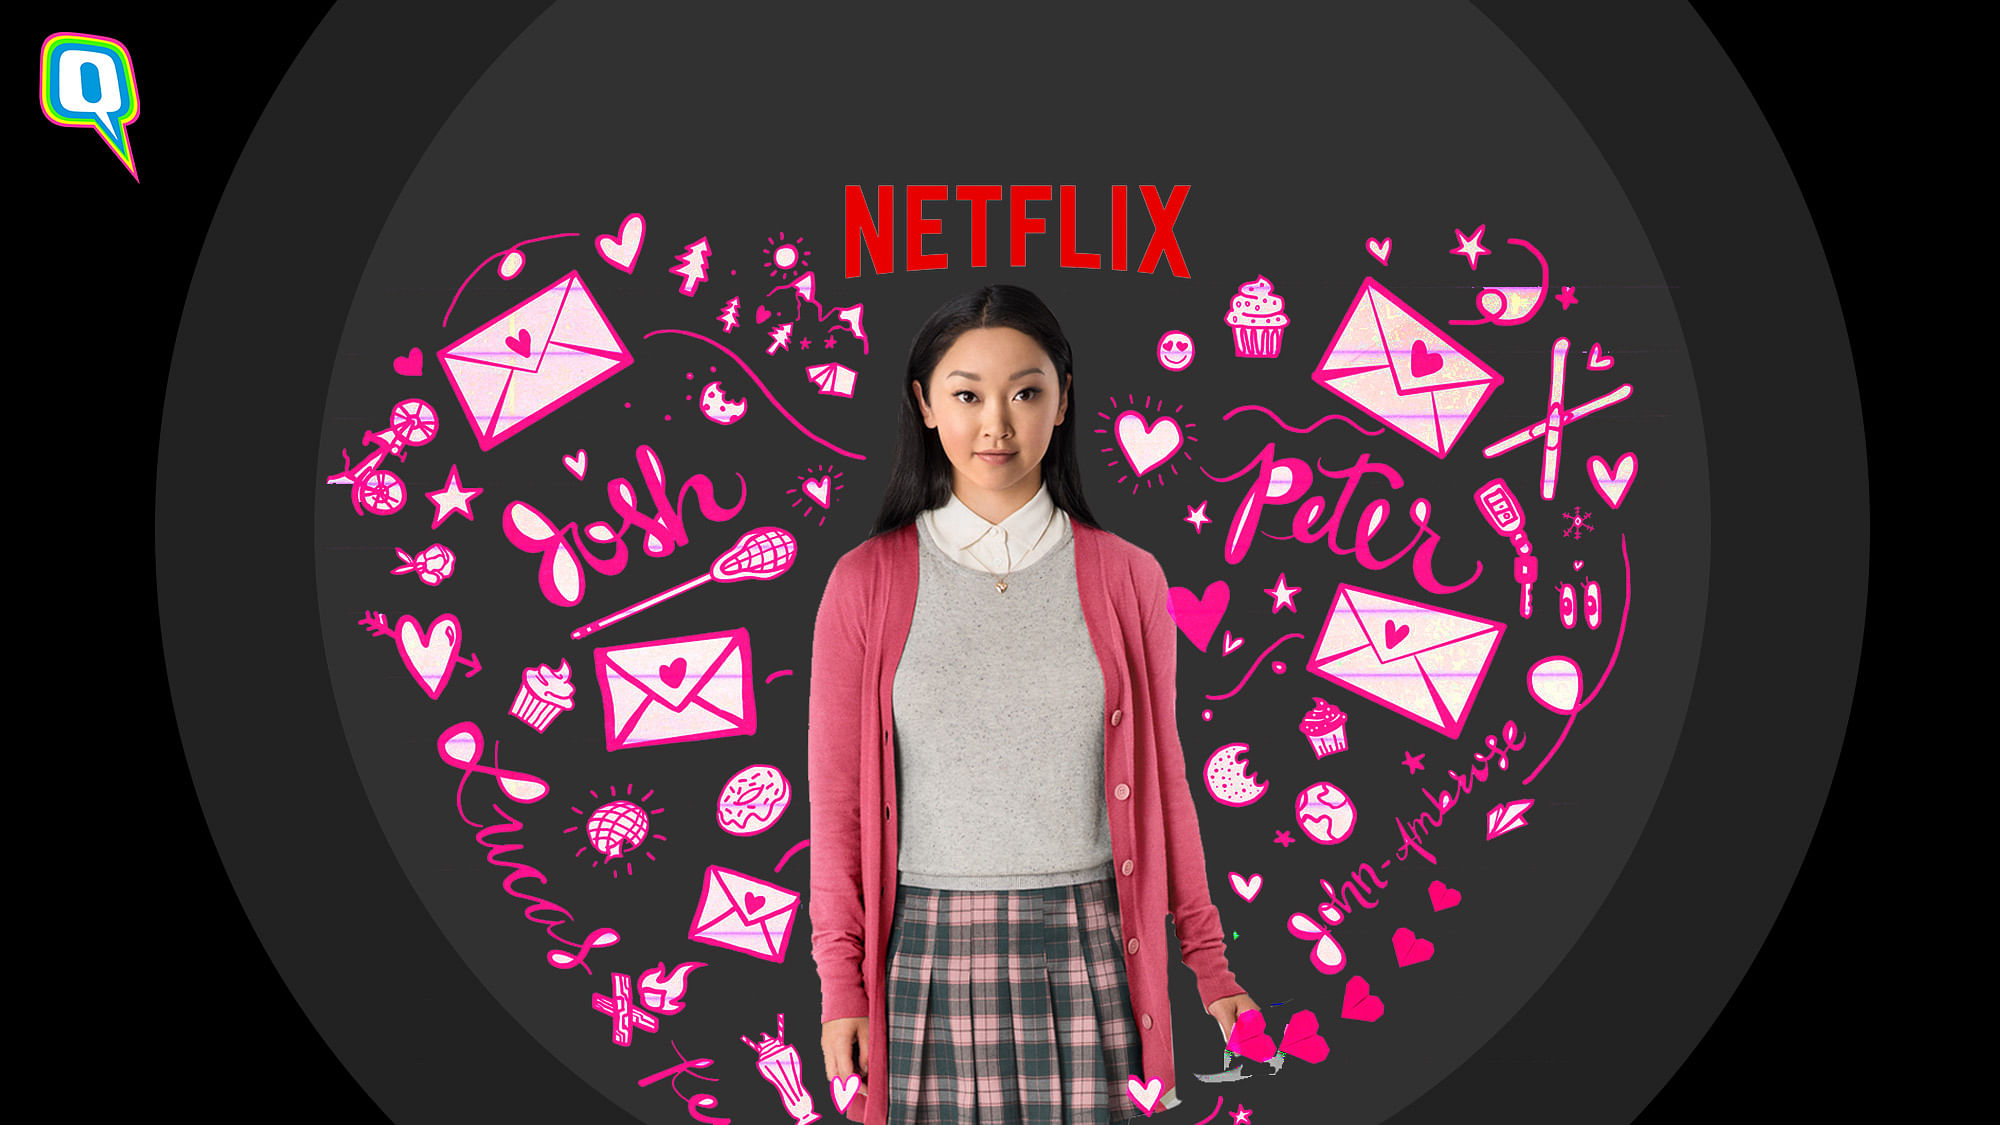 ‘To All the Boys I’ve Loved Before’ has given all of us relationship goals, there’s a quiz now to identify  which character suits you best.